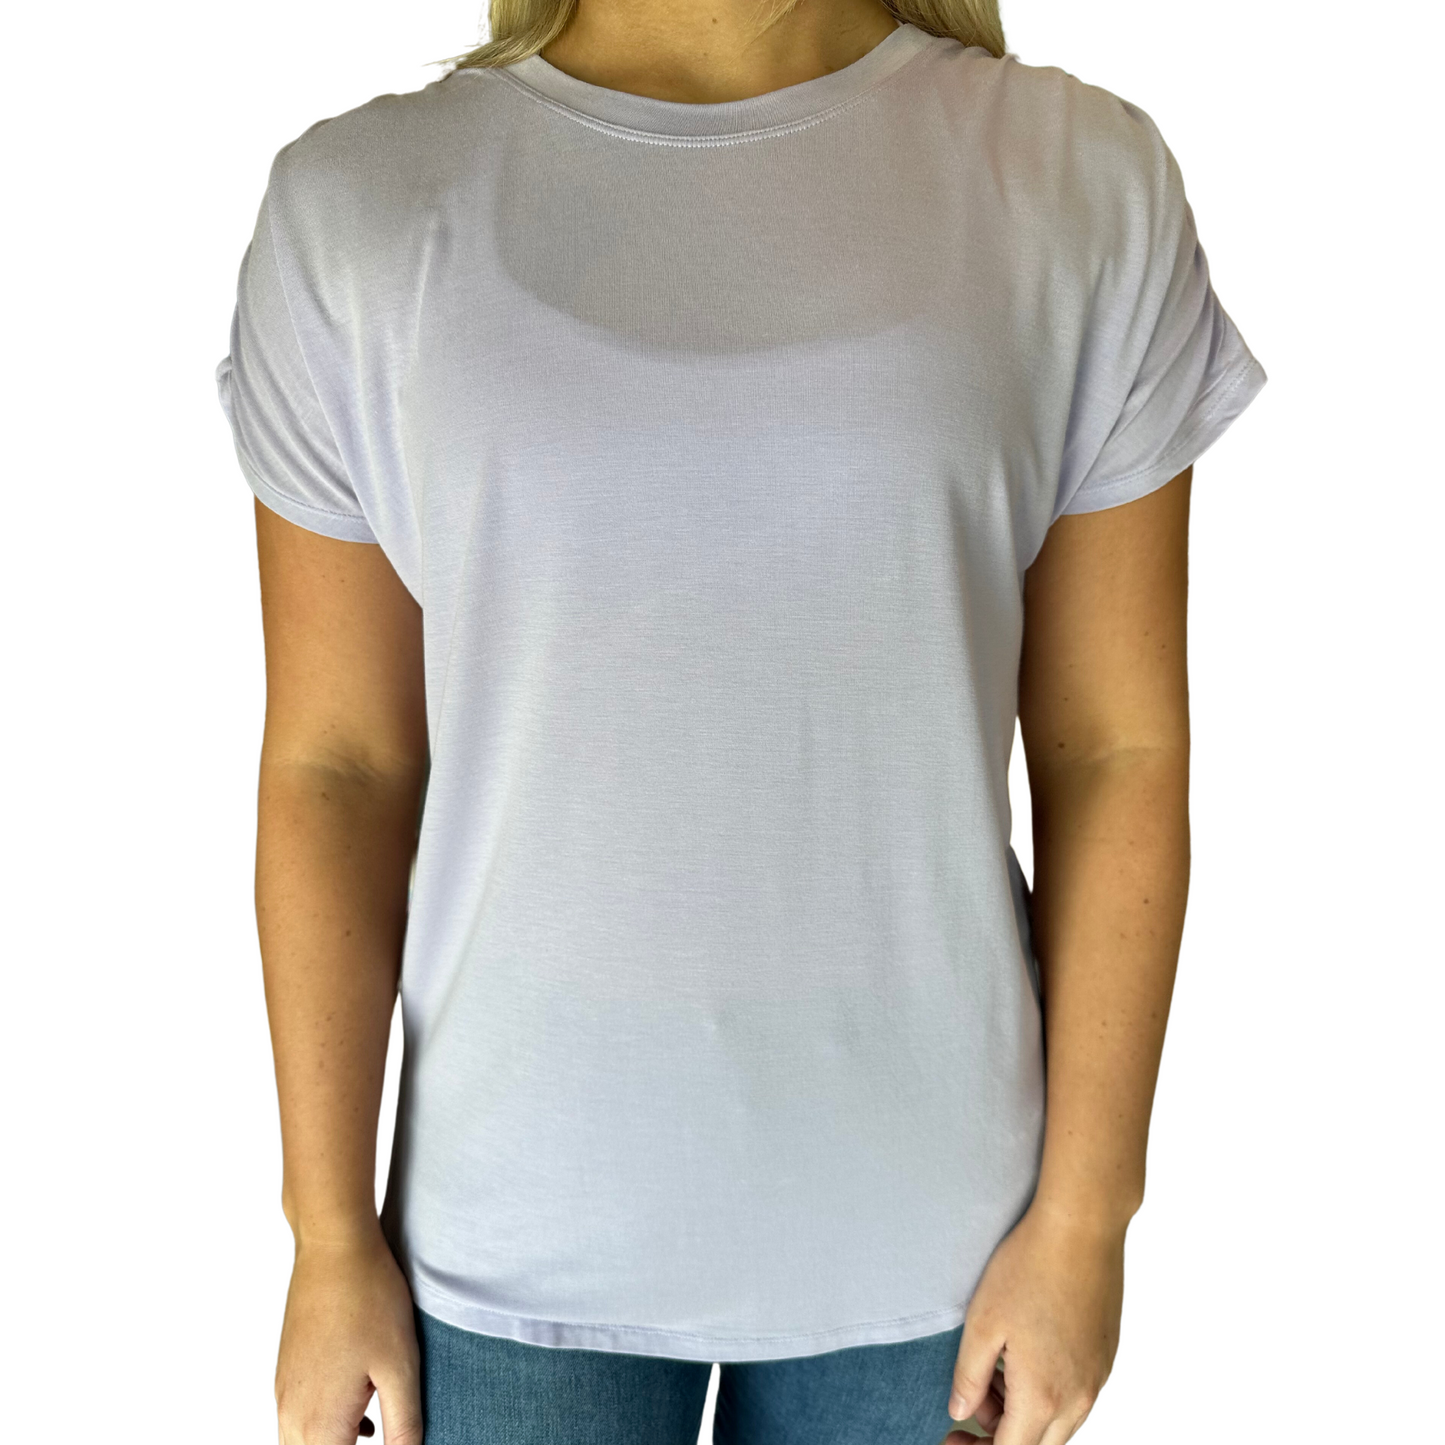 This Workout Tee is available in three colors - yellow, white, and grey - and made from lightweight, breathable fabric that effectively wicks away moisture. This ensures a cool and comfortable workout experience, so you can stay active longer.